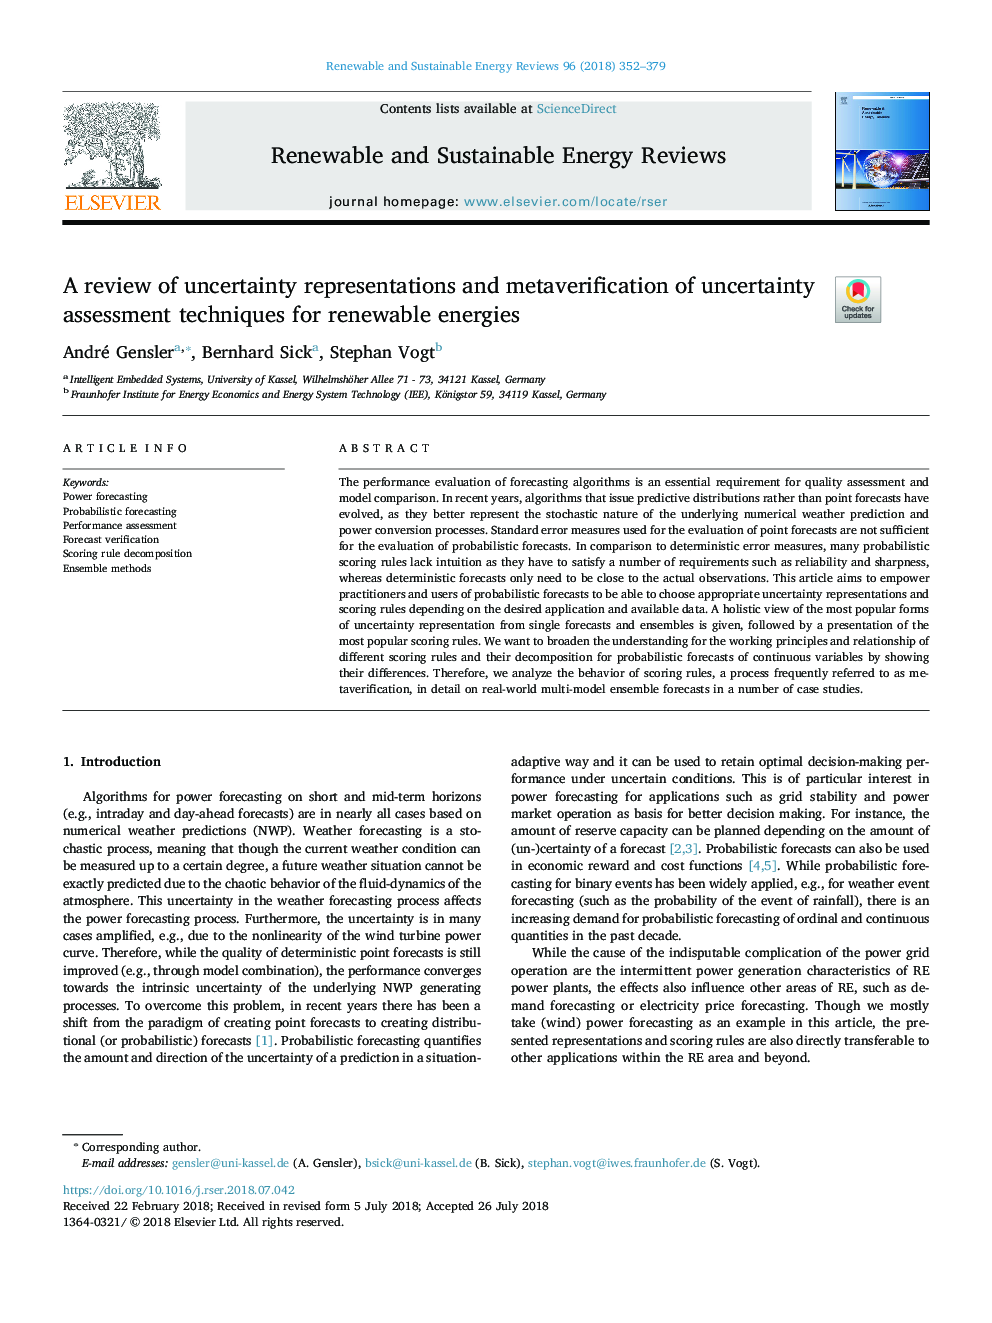 A review of uncertainty representations and metaverification of uncertainty assessment techniques for renewable energies